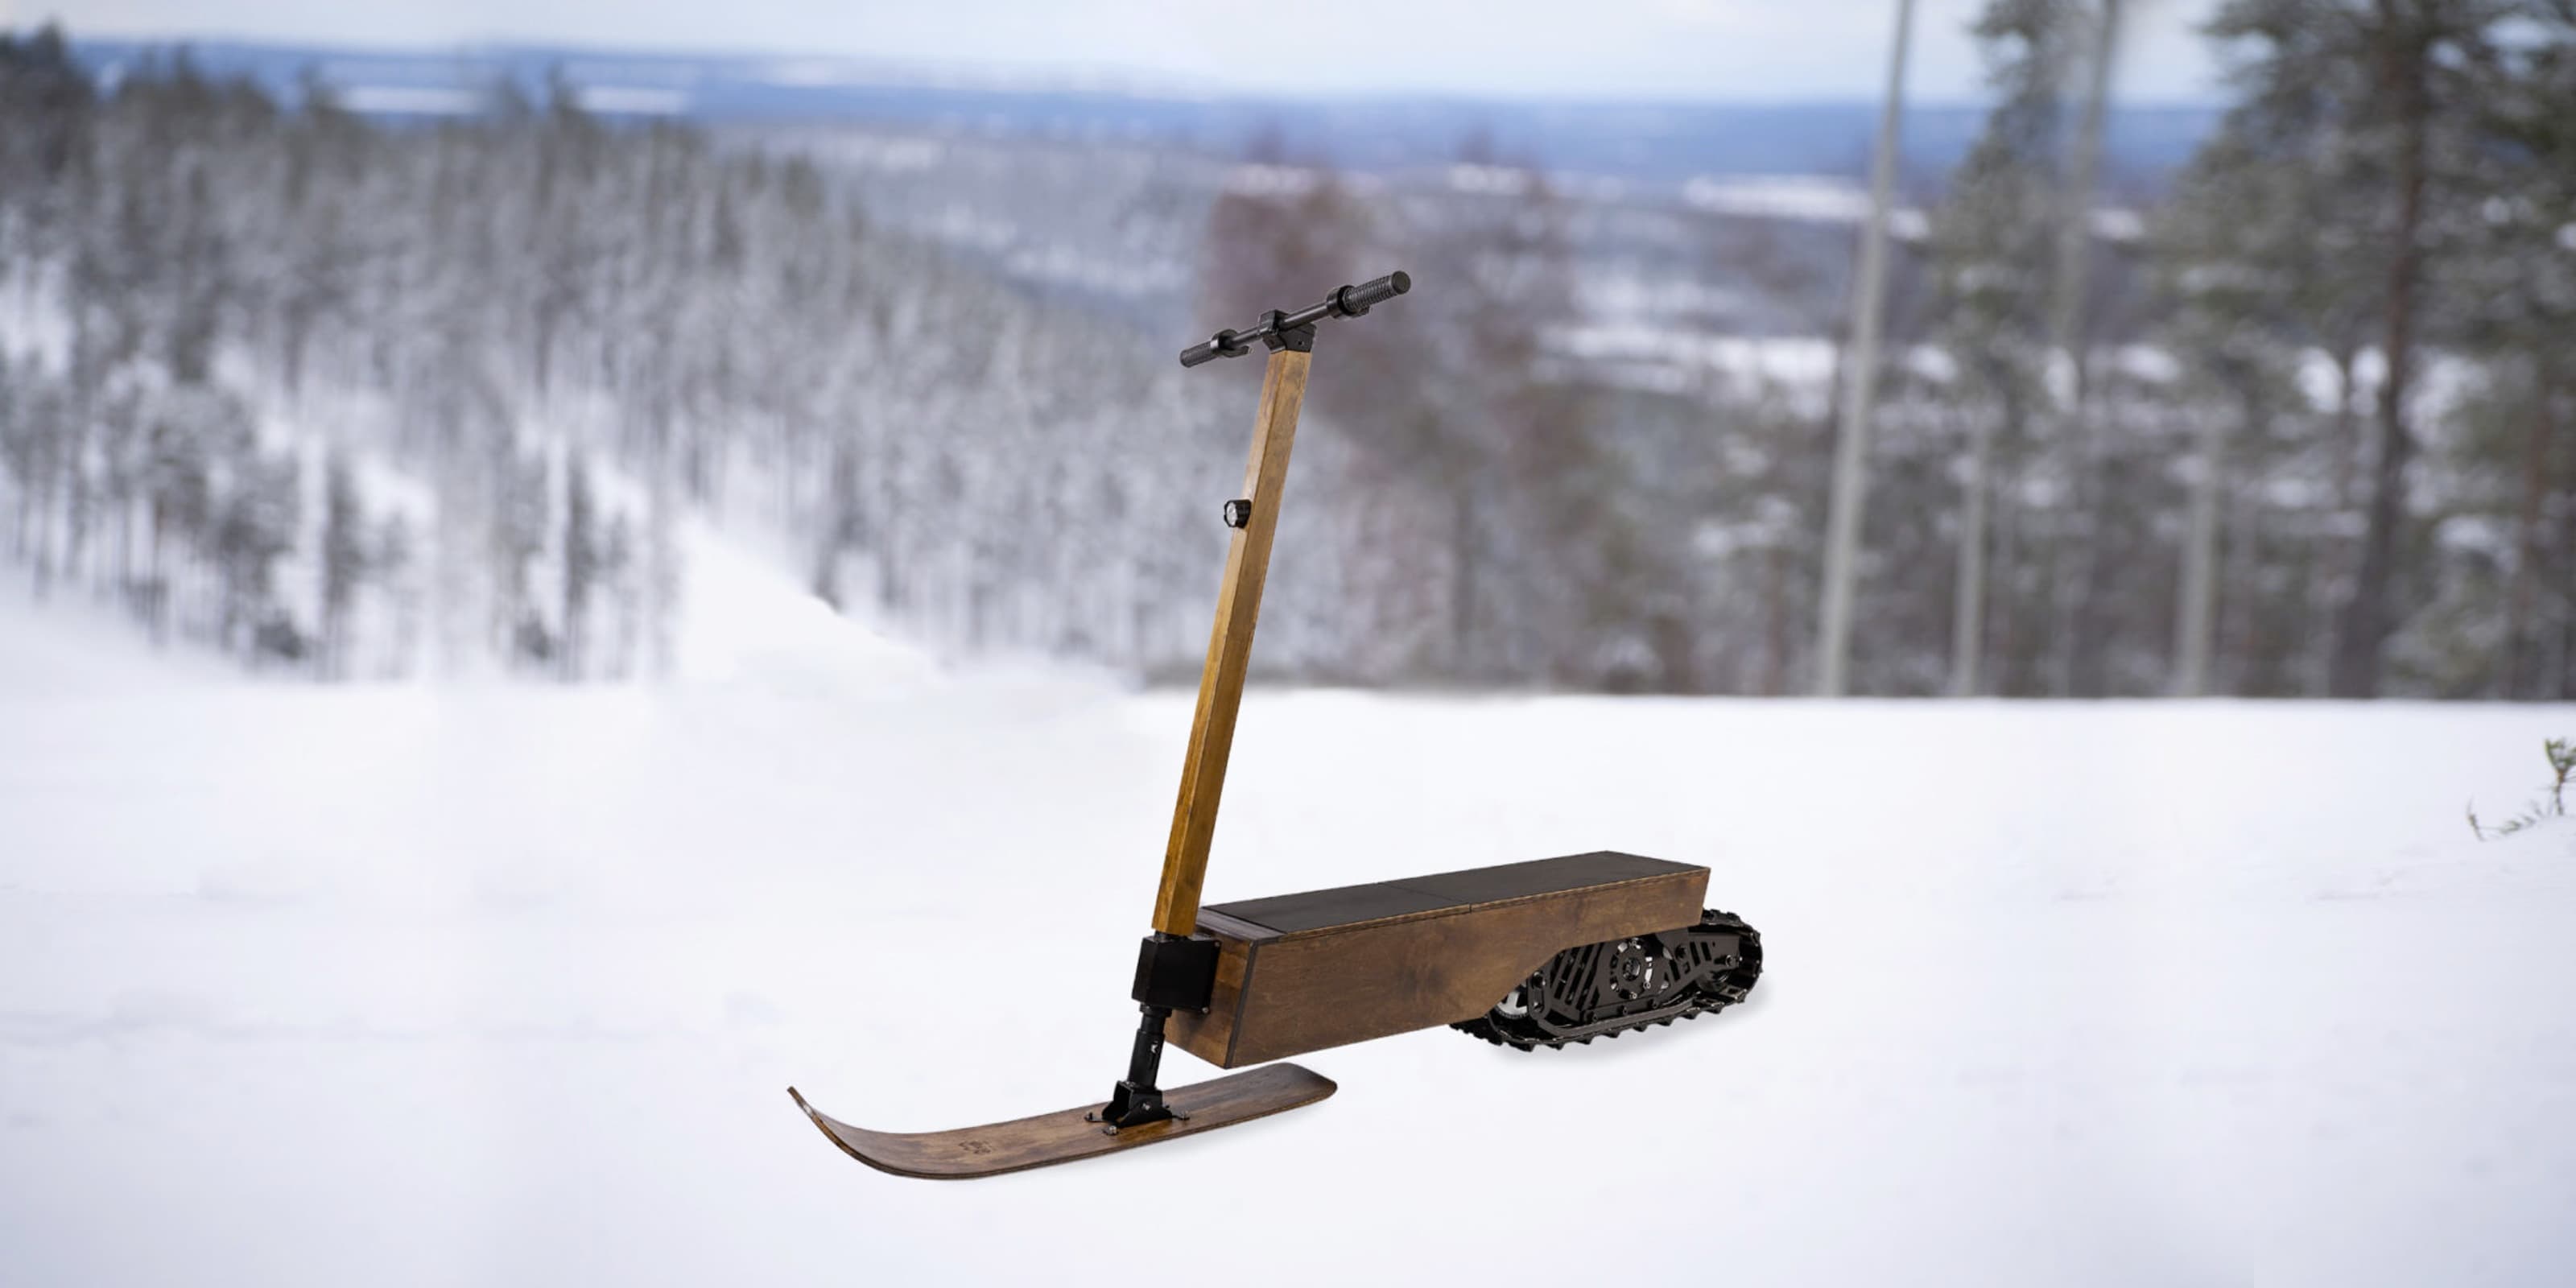 eLyly electric snow is a standing electric